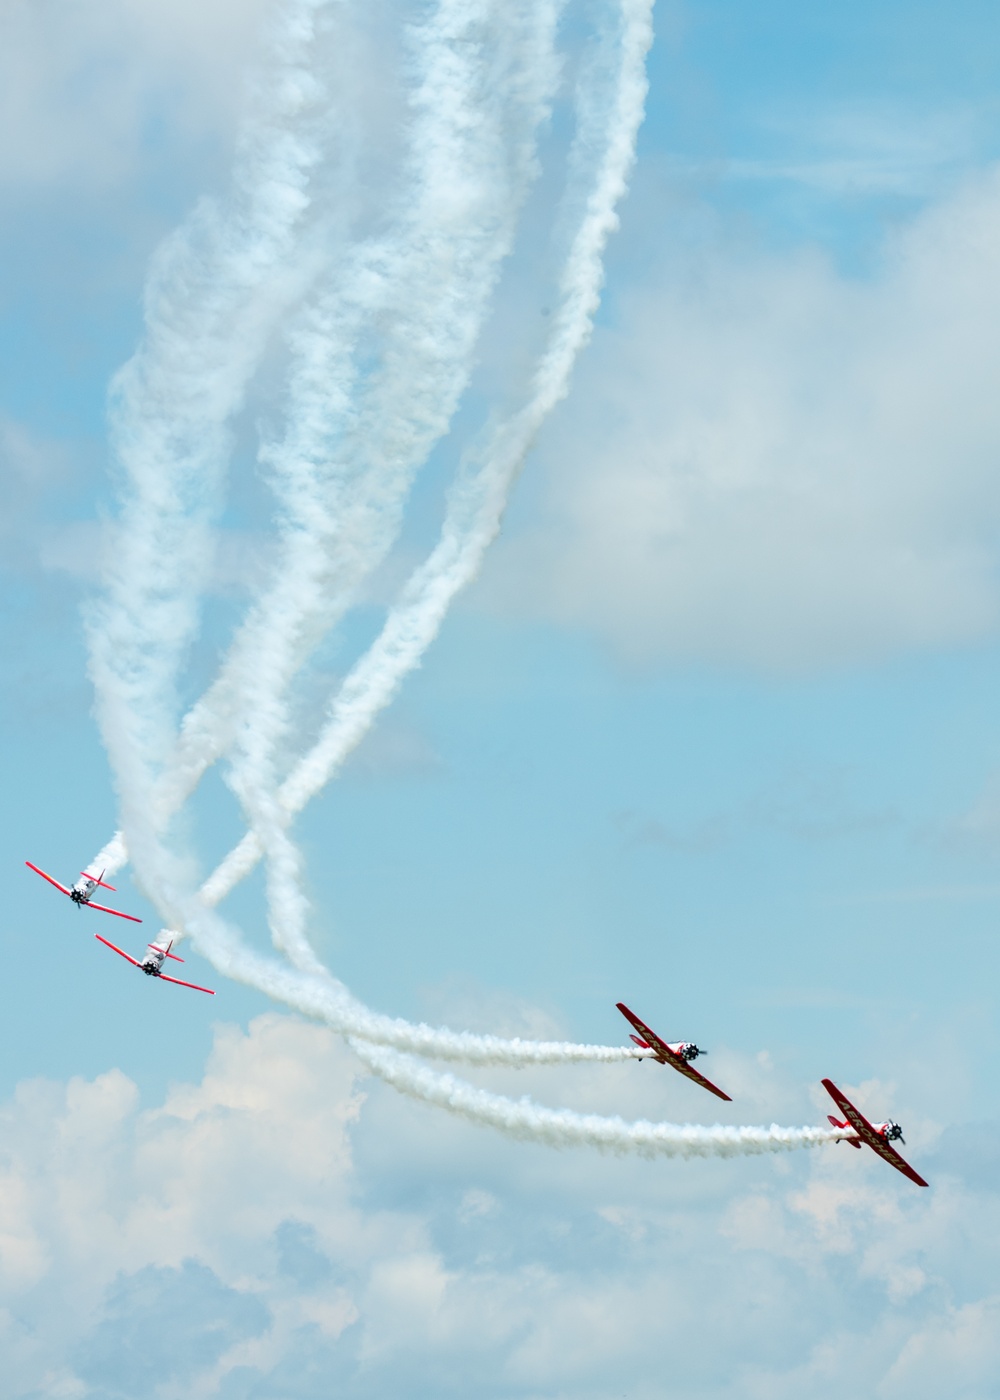 DVIDS Images Team Aeroshell performs at the Wings Over Whiteman Air